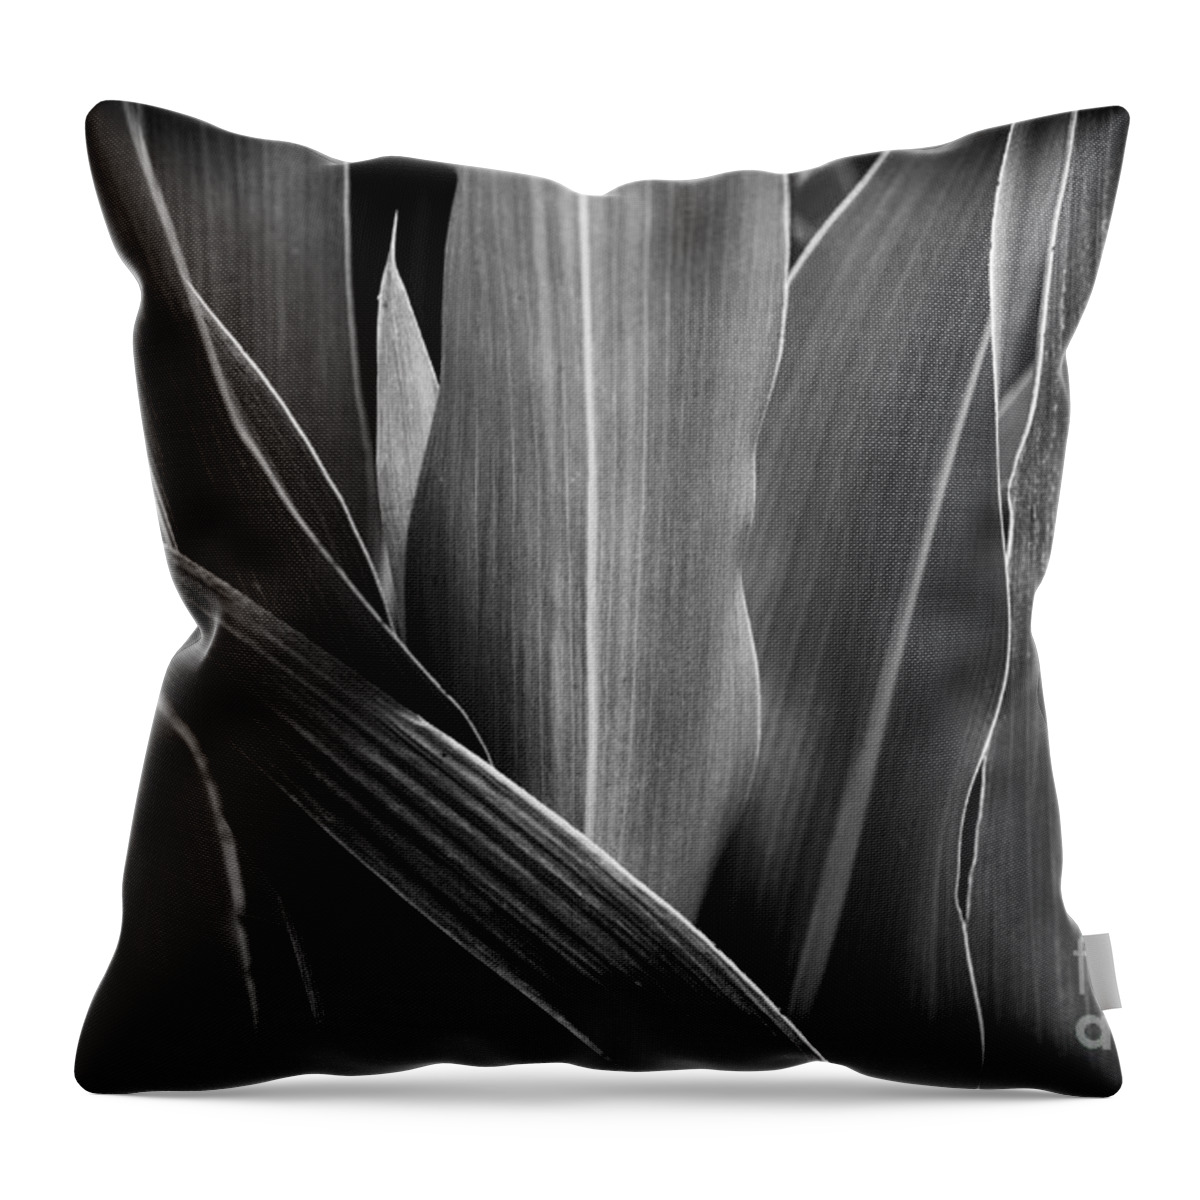 Garden Throw Pillow featuring the photograph Leaves Lines and Tones by Thomas R Fletcher